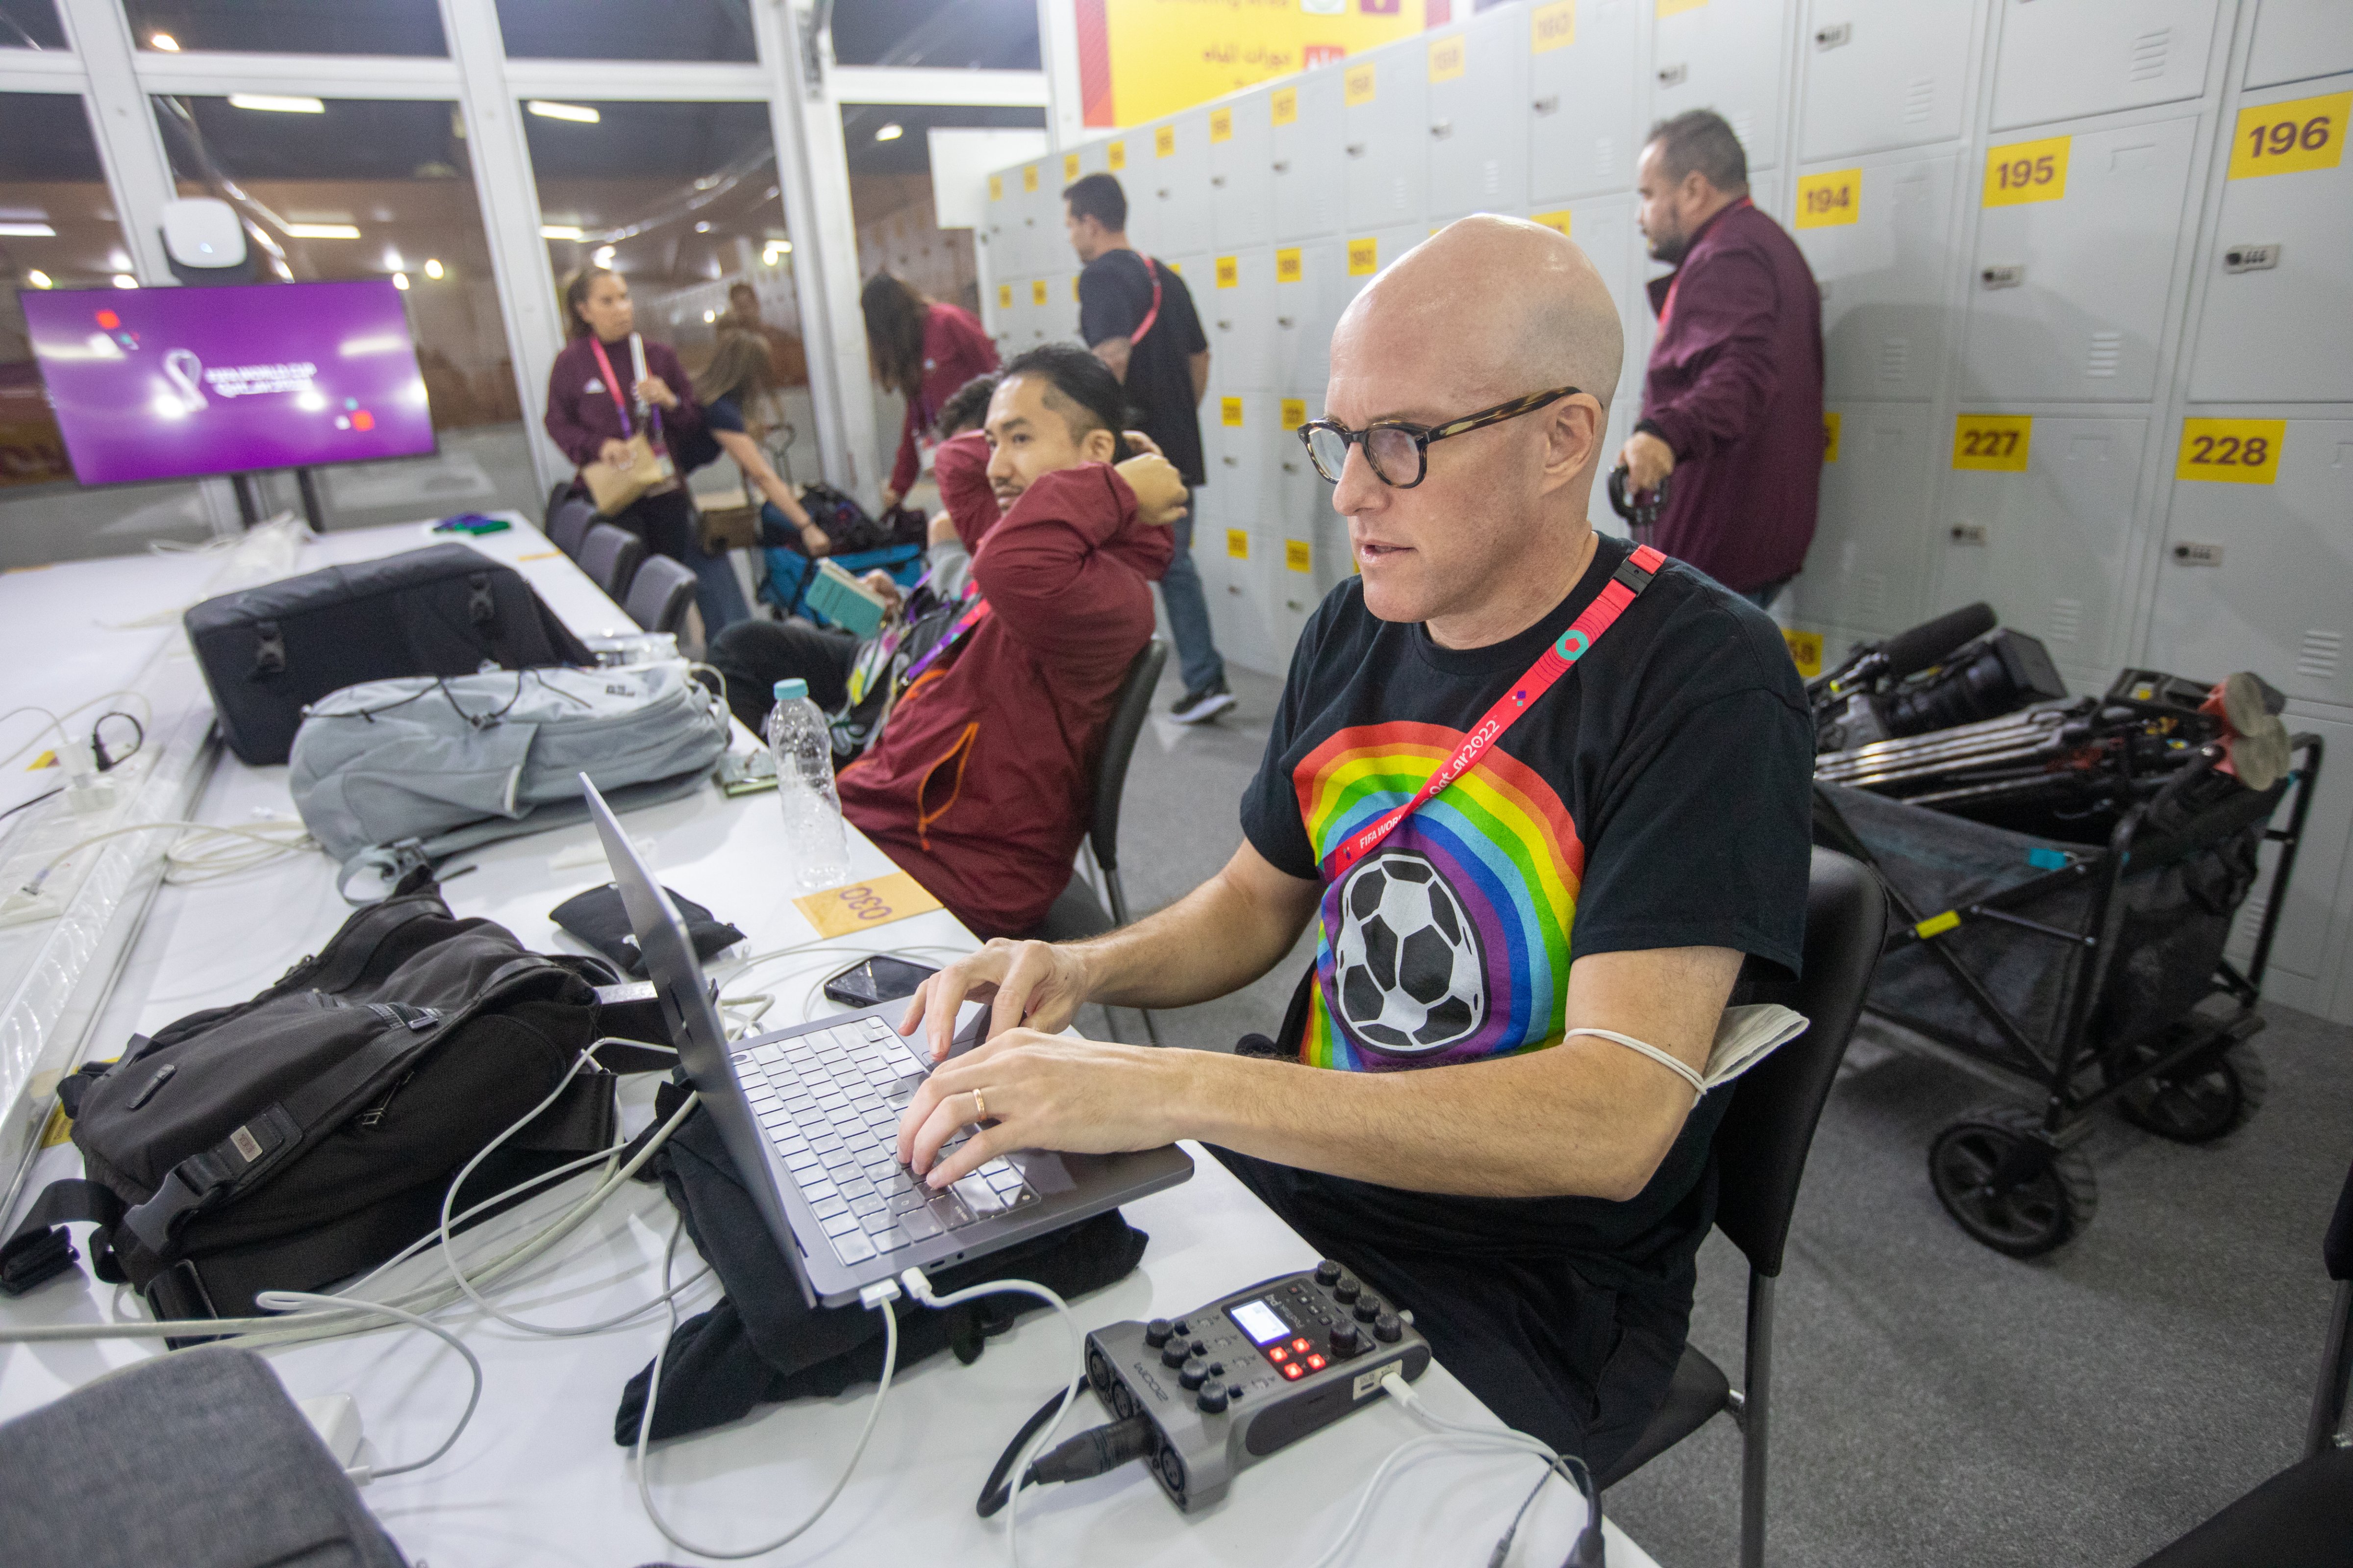 Journalist Grant Wahl (right) works in the FIFA Media Center before a FIFA World Cup Qatar 2022 Group B match between Wales and USMNT at Ahmad Bin Ali Stadium on November 21, 2022 in Al Rayyan, Qatar. He had been detained earlier by stadium security for wearing a rainbow-colored t-shirt before later being allowed to enter the stadium. (Doug Zimmerman/ISI Photos—Getty Images)